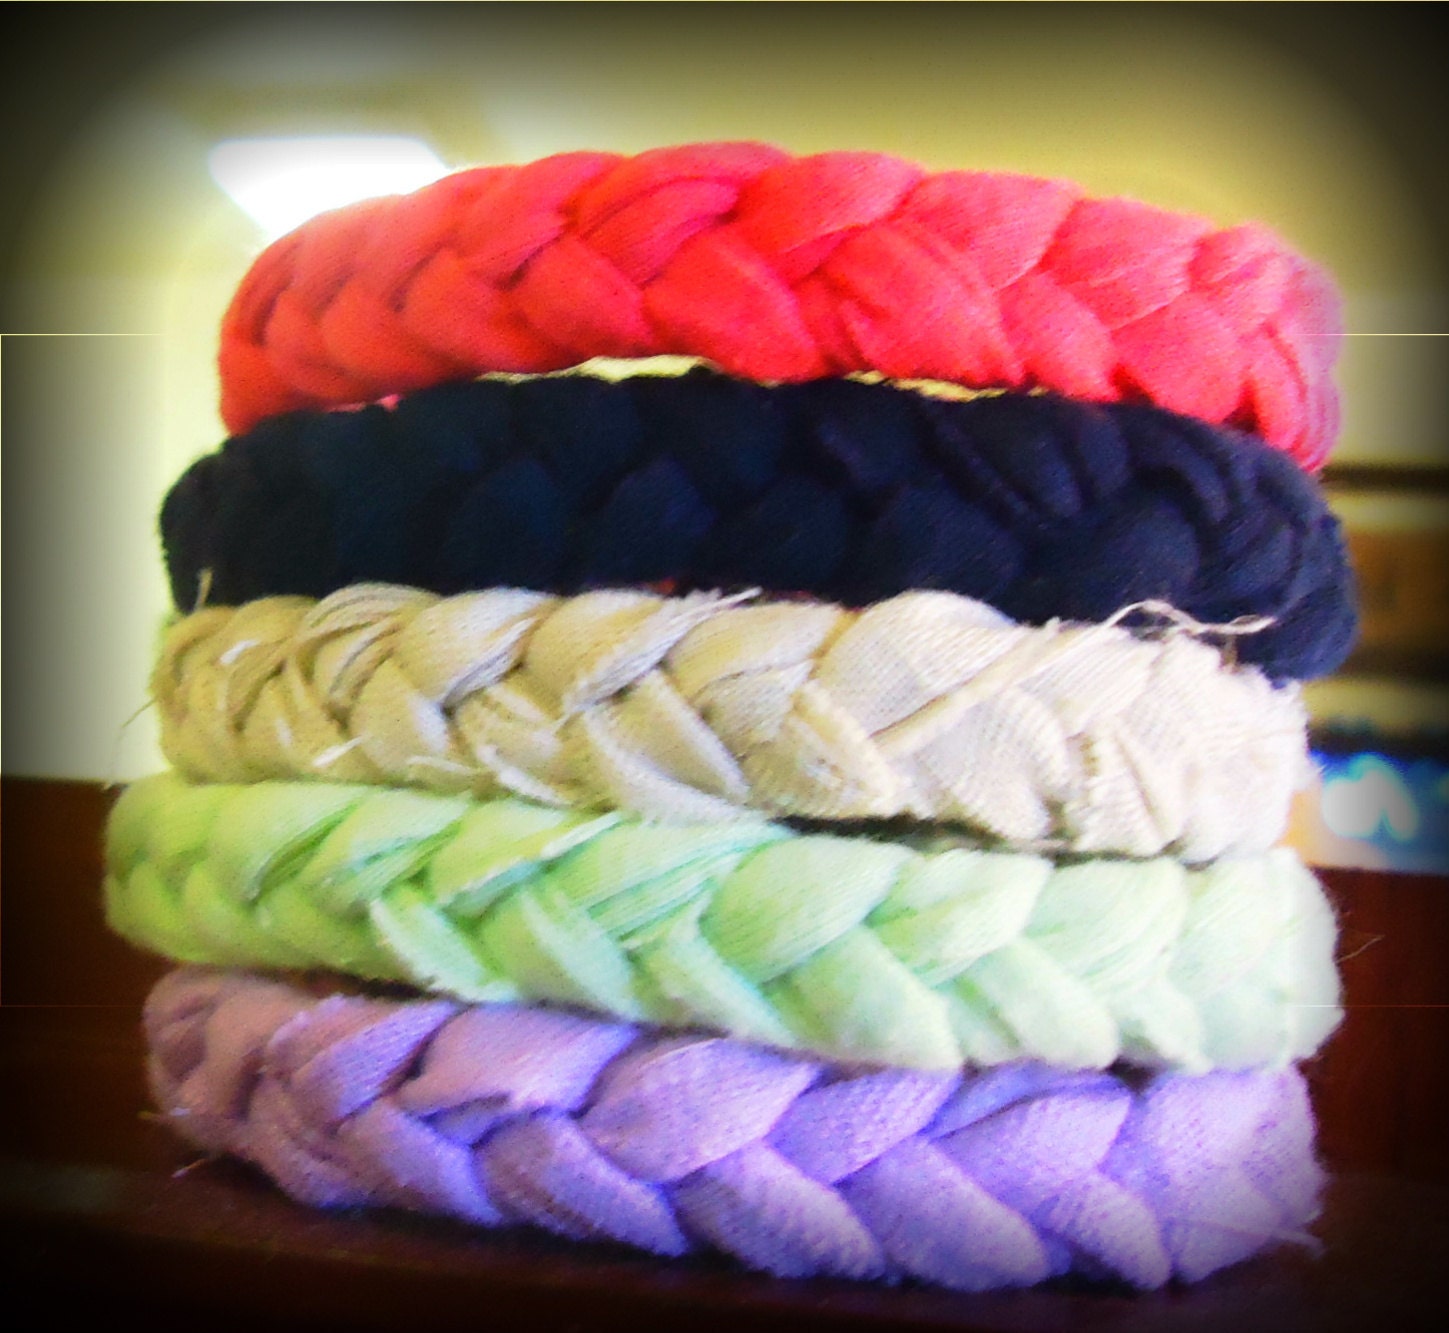 Handmade & Upcycled Braided Cotton AS Bracelet (choose from 5 colors)